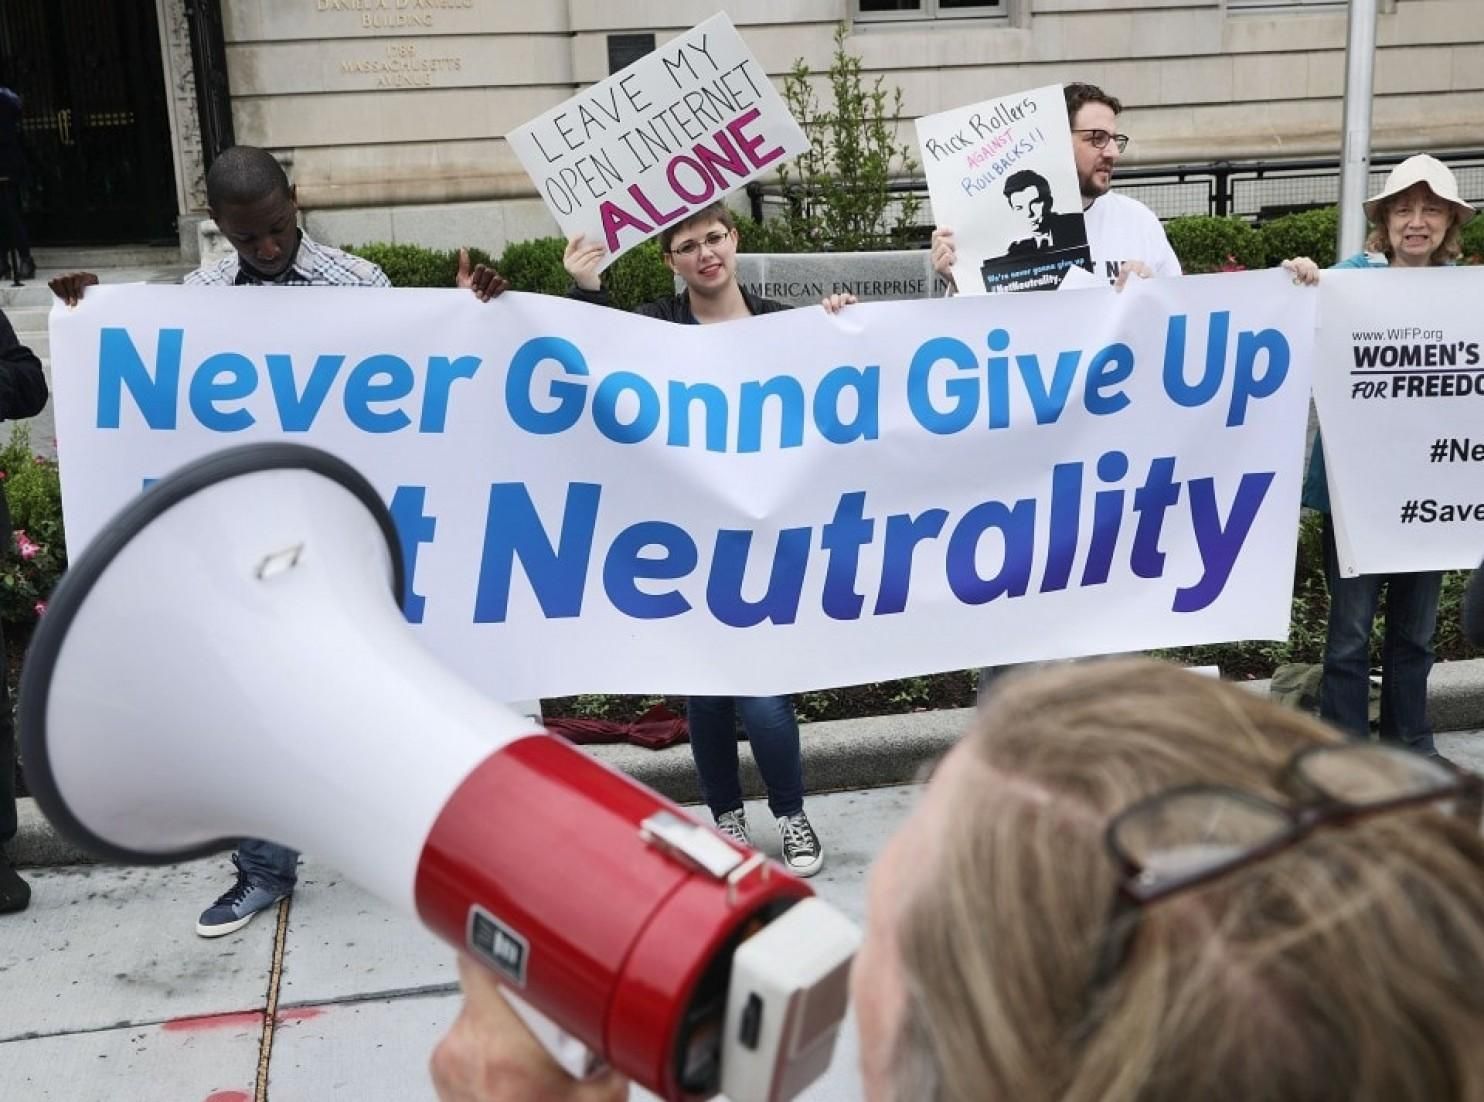 Net neutrality supporters want to ensure that the Internet remains an open and democratic place.